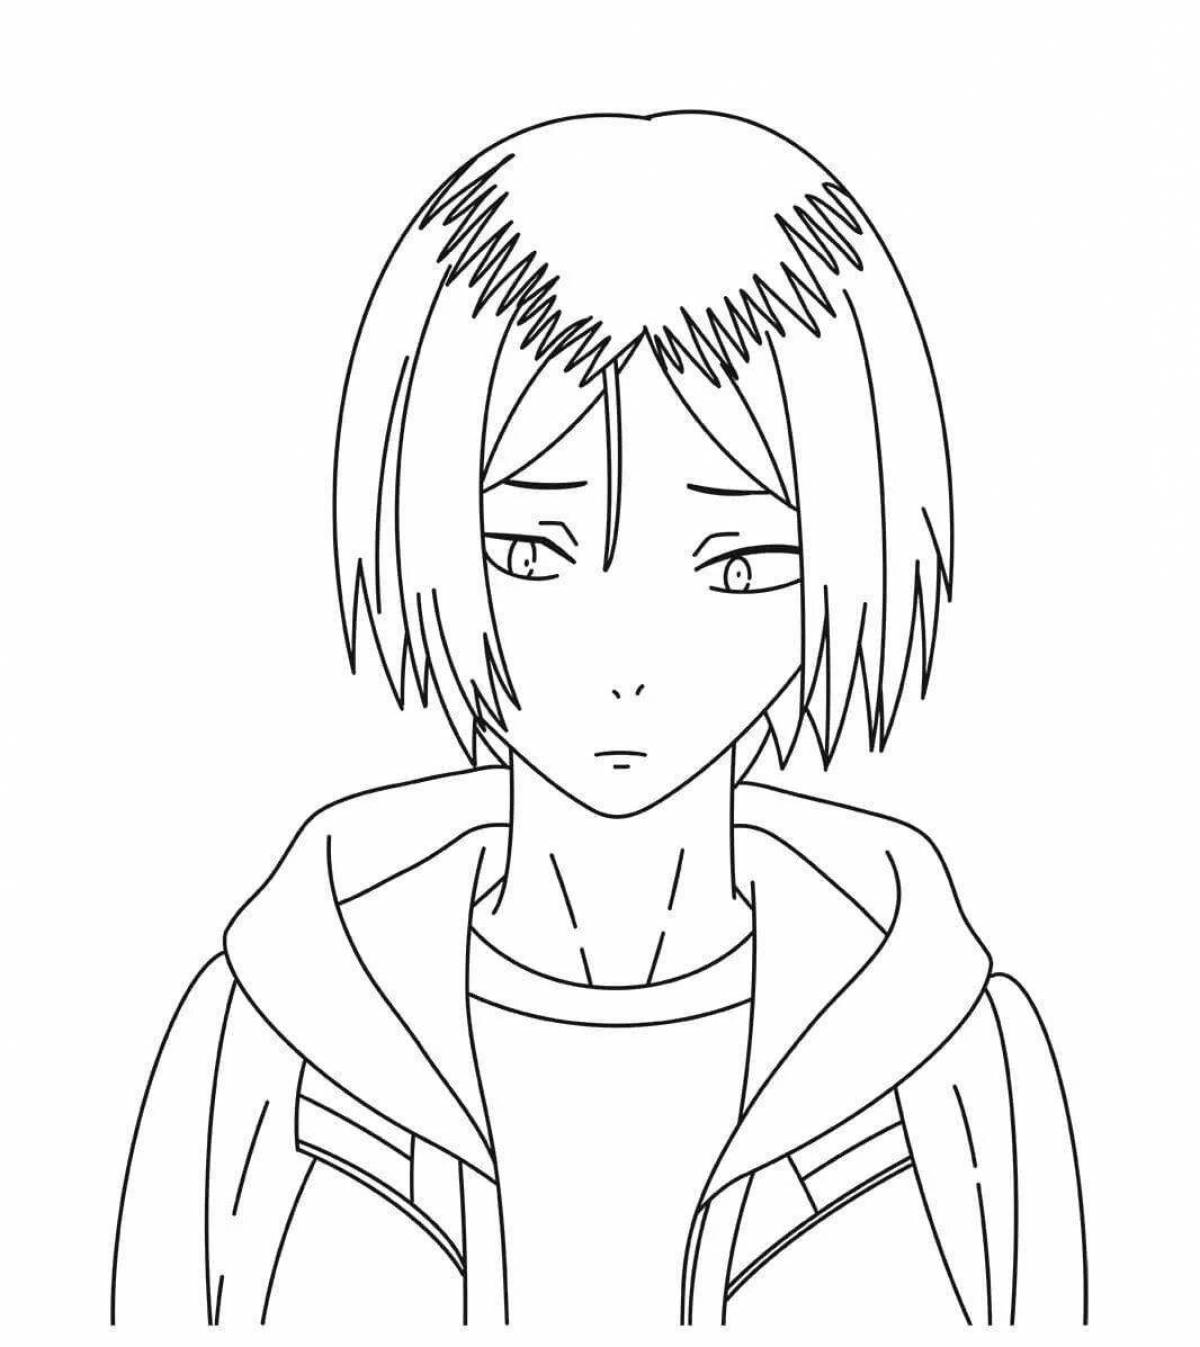 Cute anime pencil coloring page